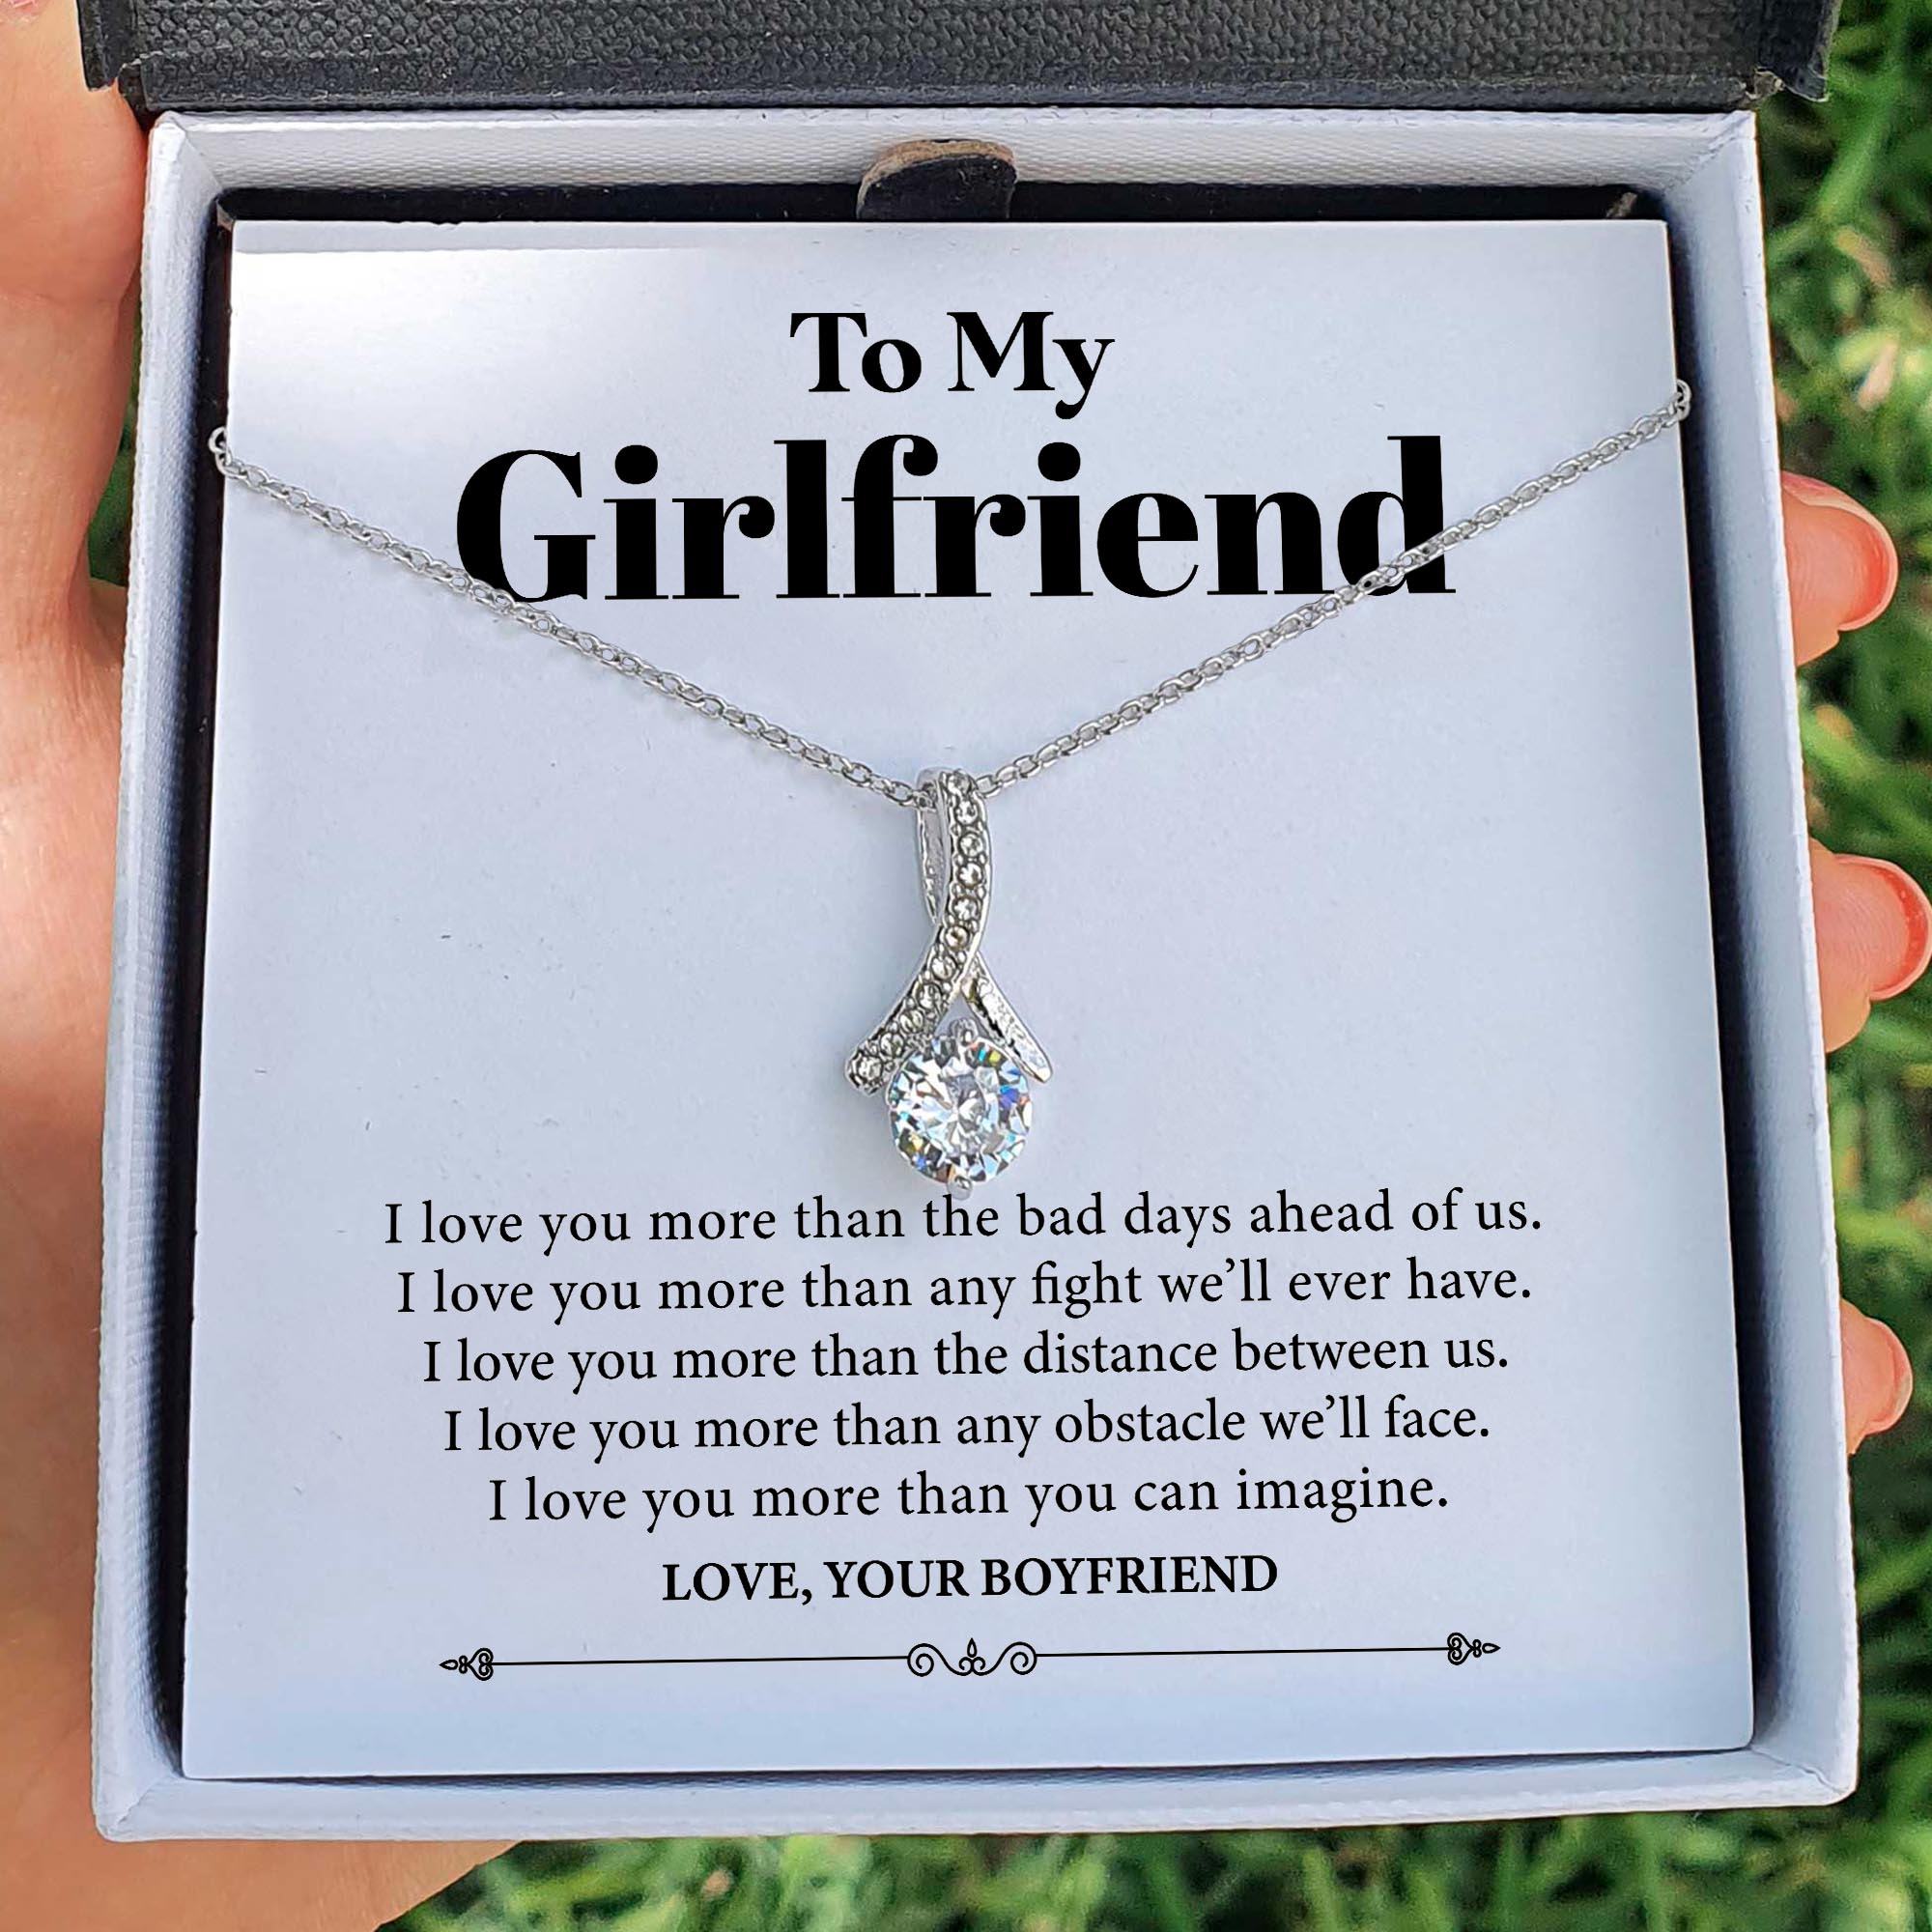 ShineOn Fulfillment Jewelry Standard Box To my Girlfriend - I Love You More - Necklace